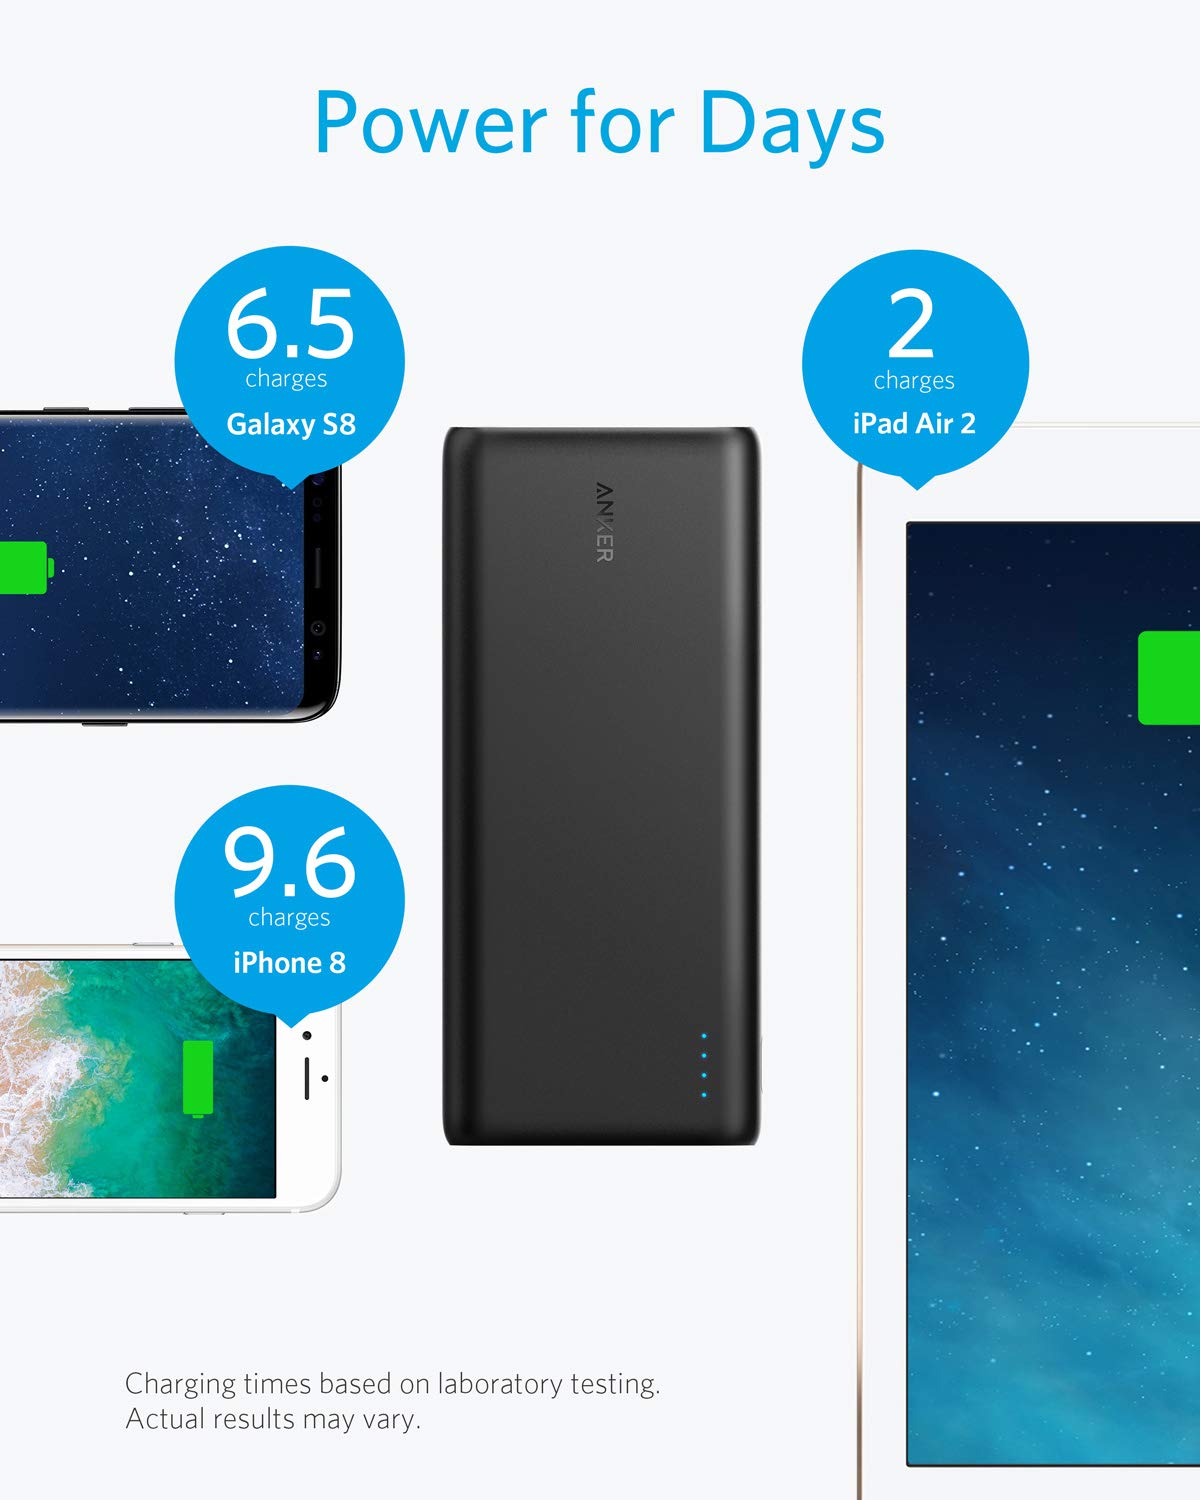 Anker PowerCore 26800 Portable Charger, 26800mAh External Battery with Dual Input Port and Double-Speed Recharging, 3 USB Ports for iPhone, iPad, Samsung Galaxy, Android and Other Smart Devices - Saamaan.Pk